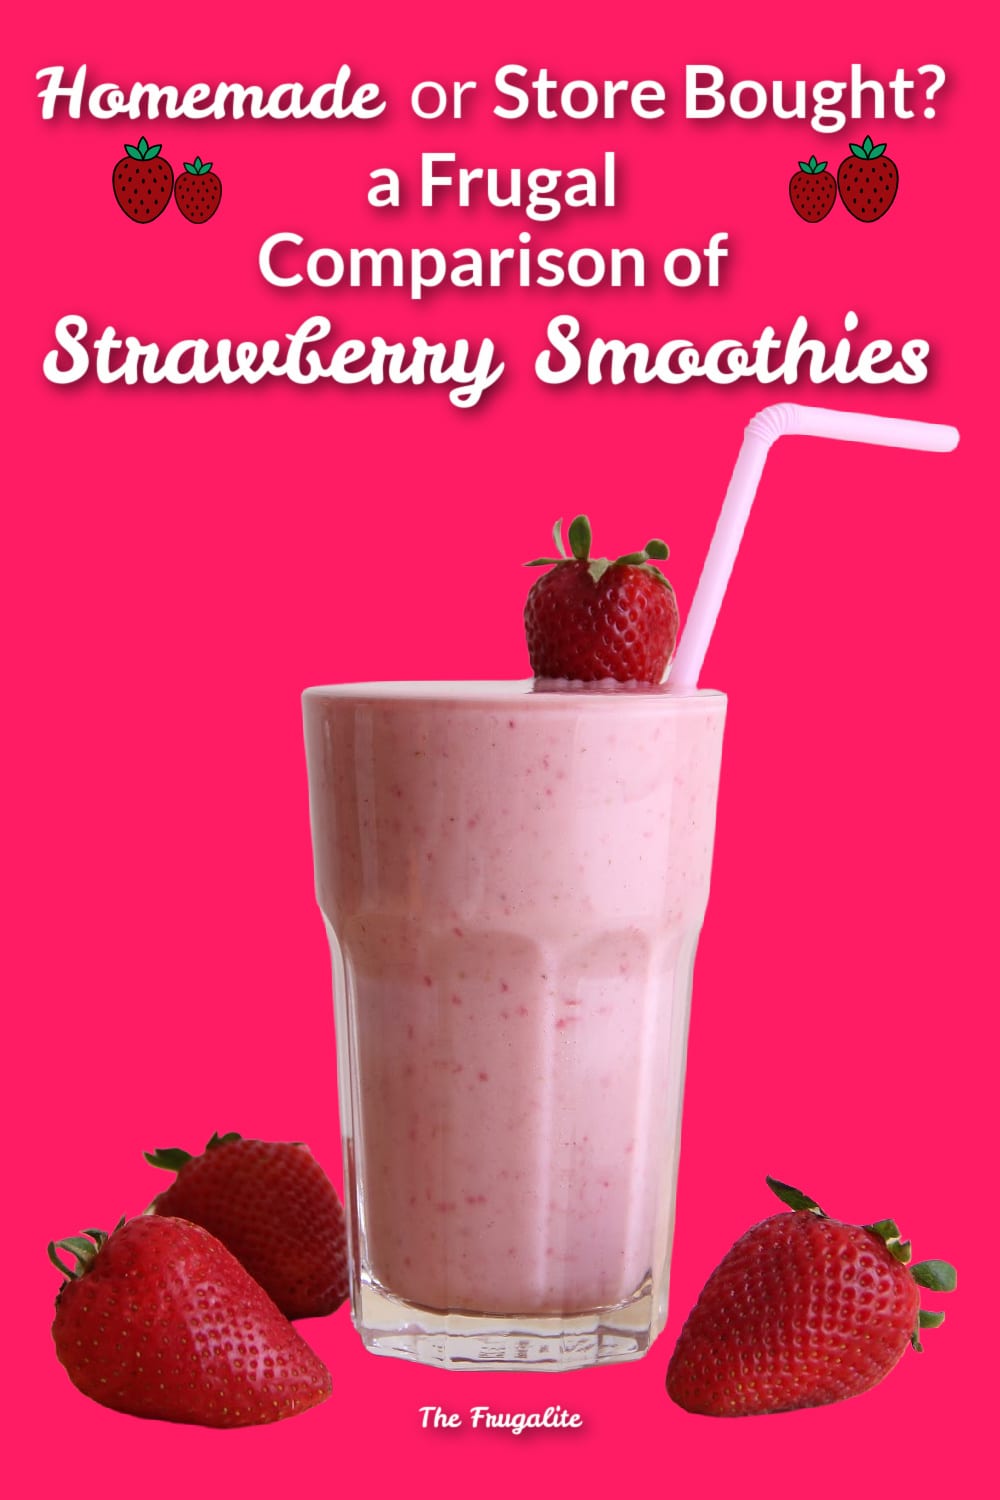 Homemade or Store Bought? A Frugal Comparison of Strawberry Smoothies